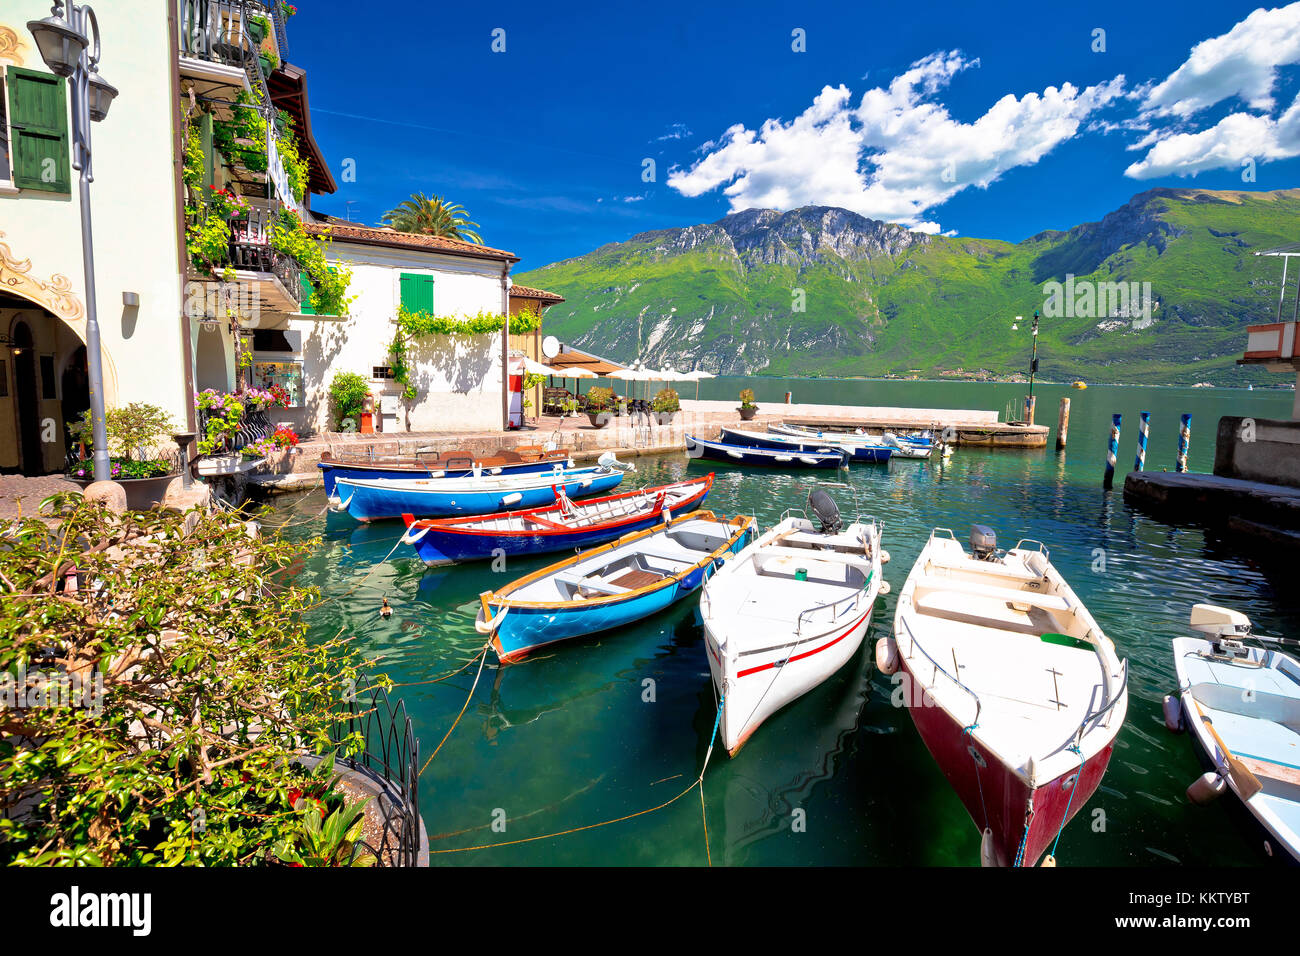 Lake Garda in town of Limone sul Garda waterfront view,colorful boats, Lombardy region of Italy Stock Photo